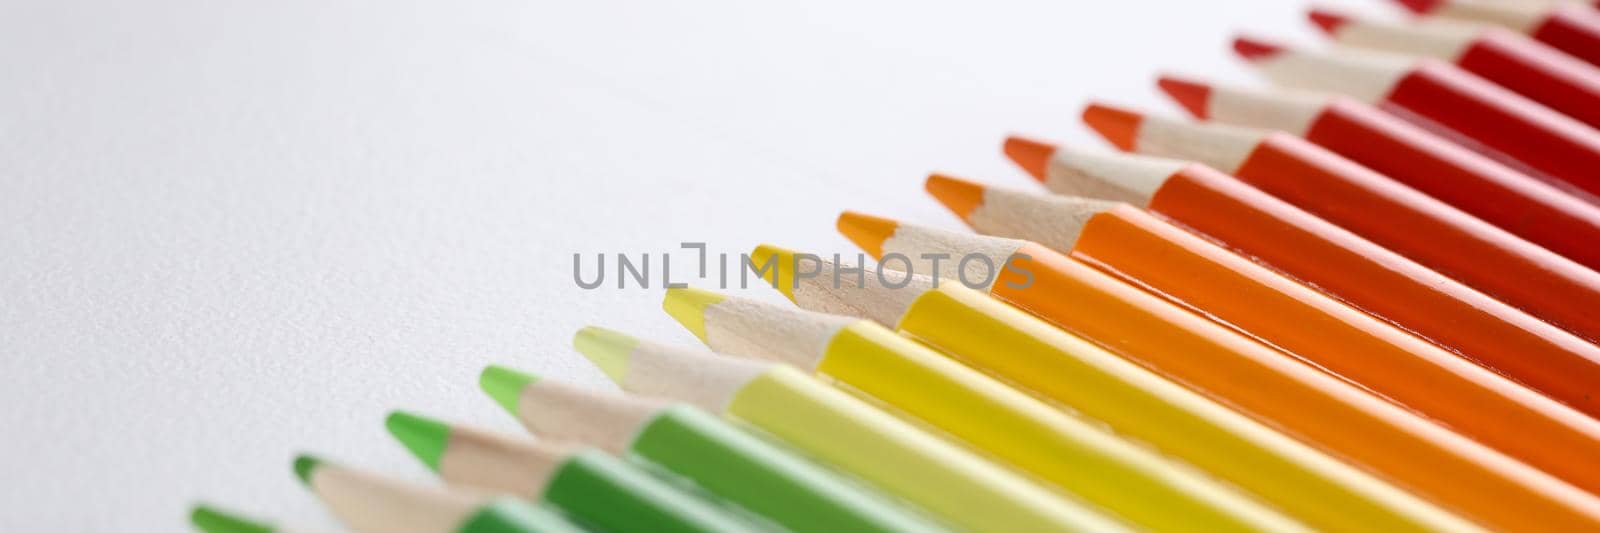 Colored pencils with sharp tips lie in a row, close-up by kuprevich